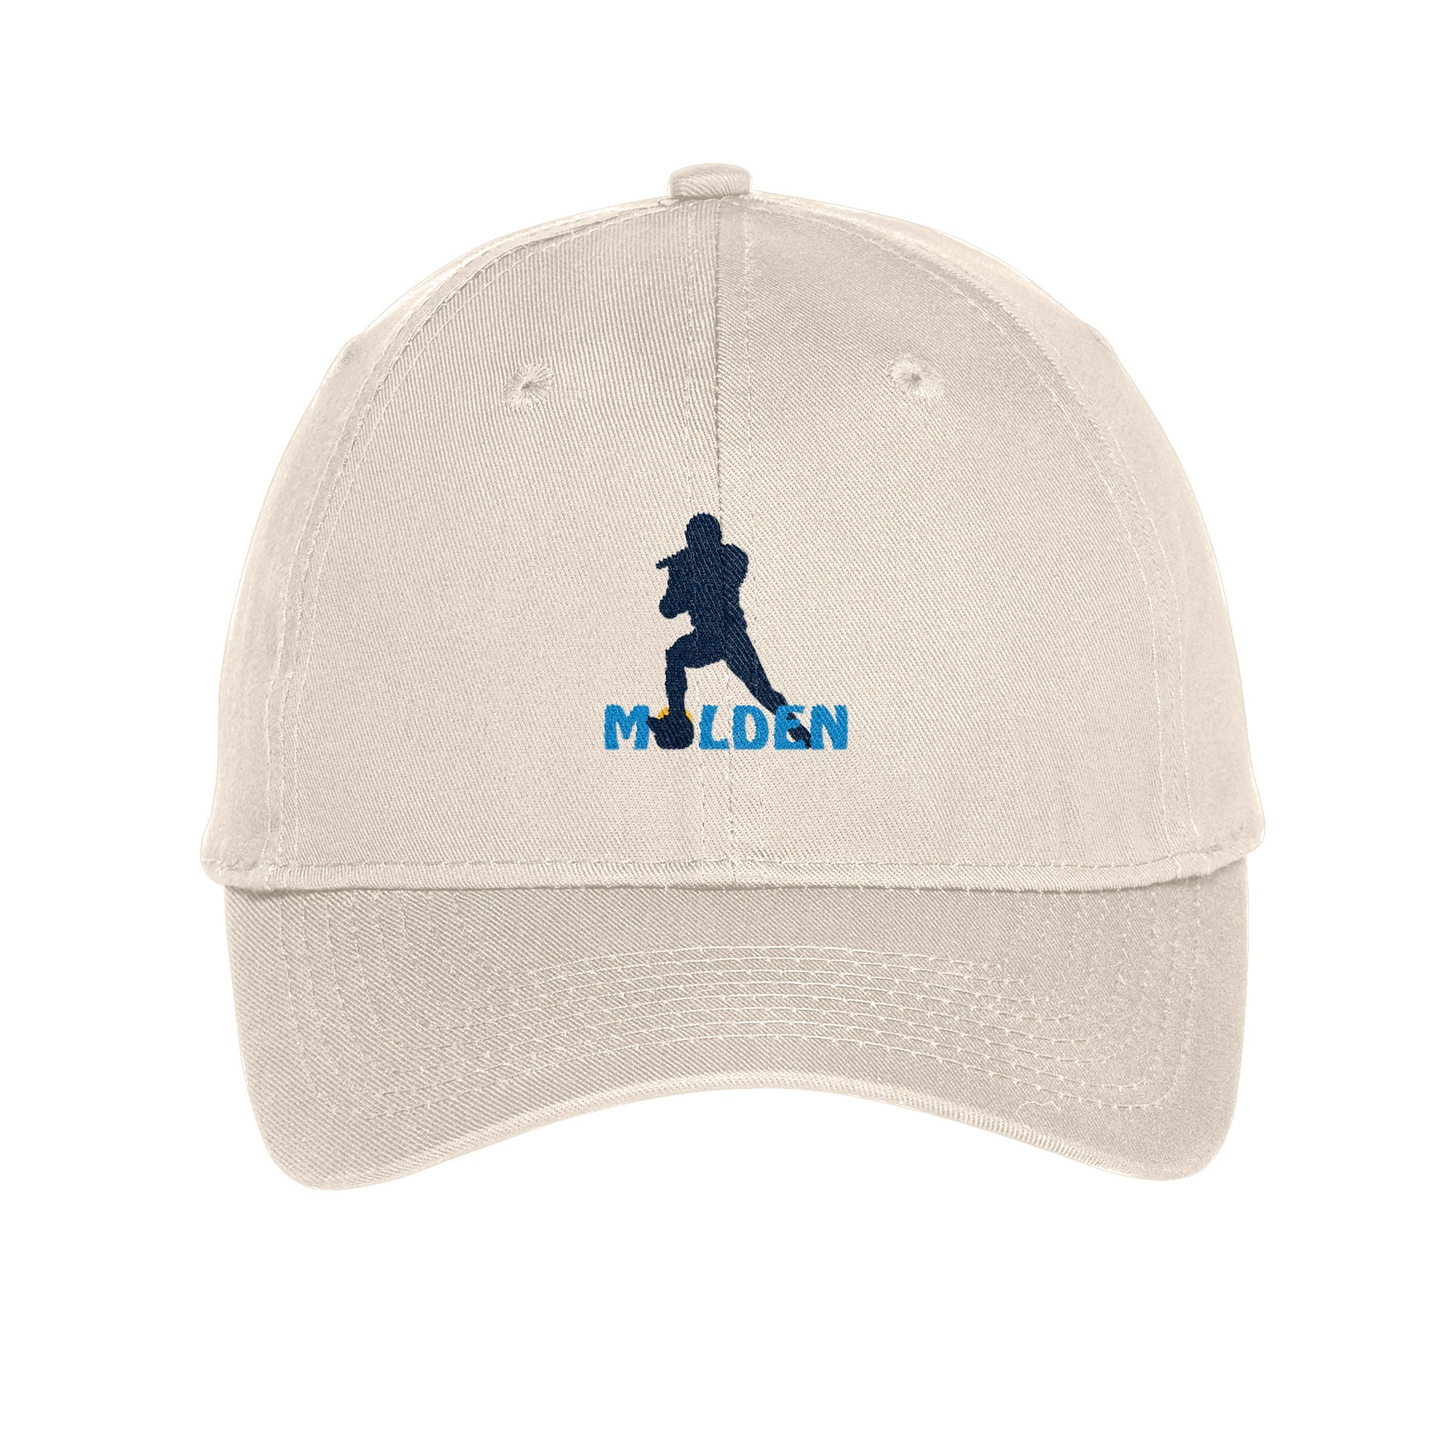 GT Molden Embroidered Twill Cap